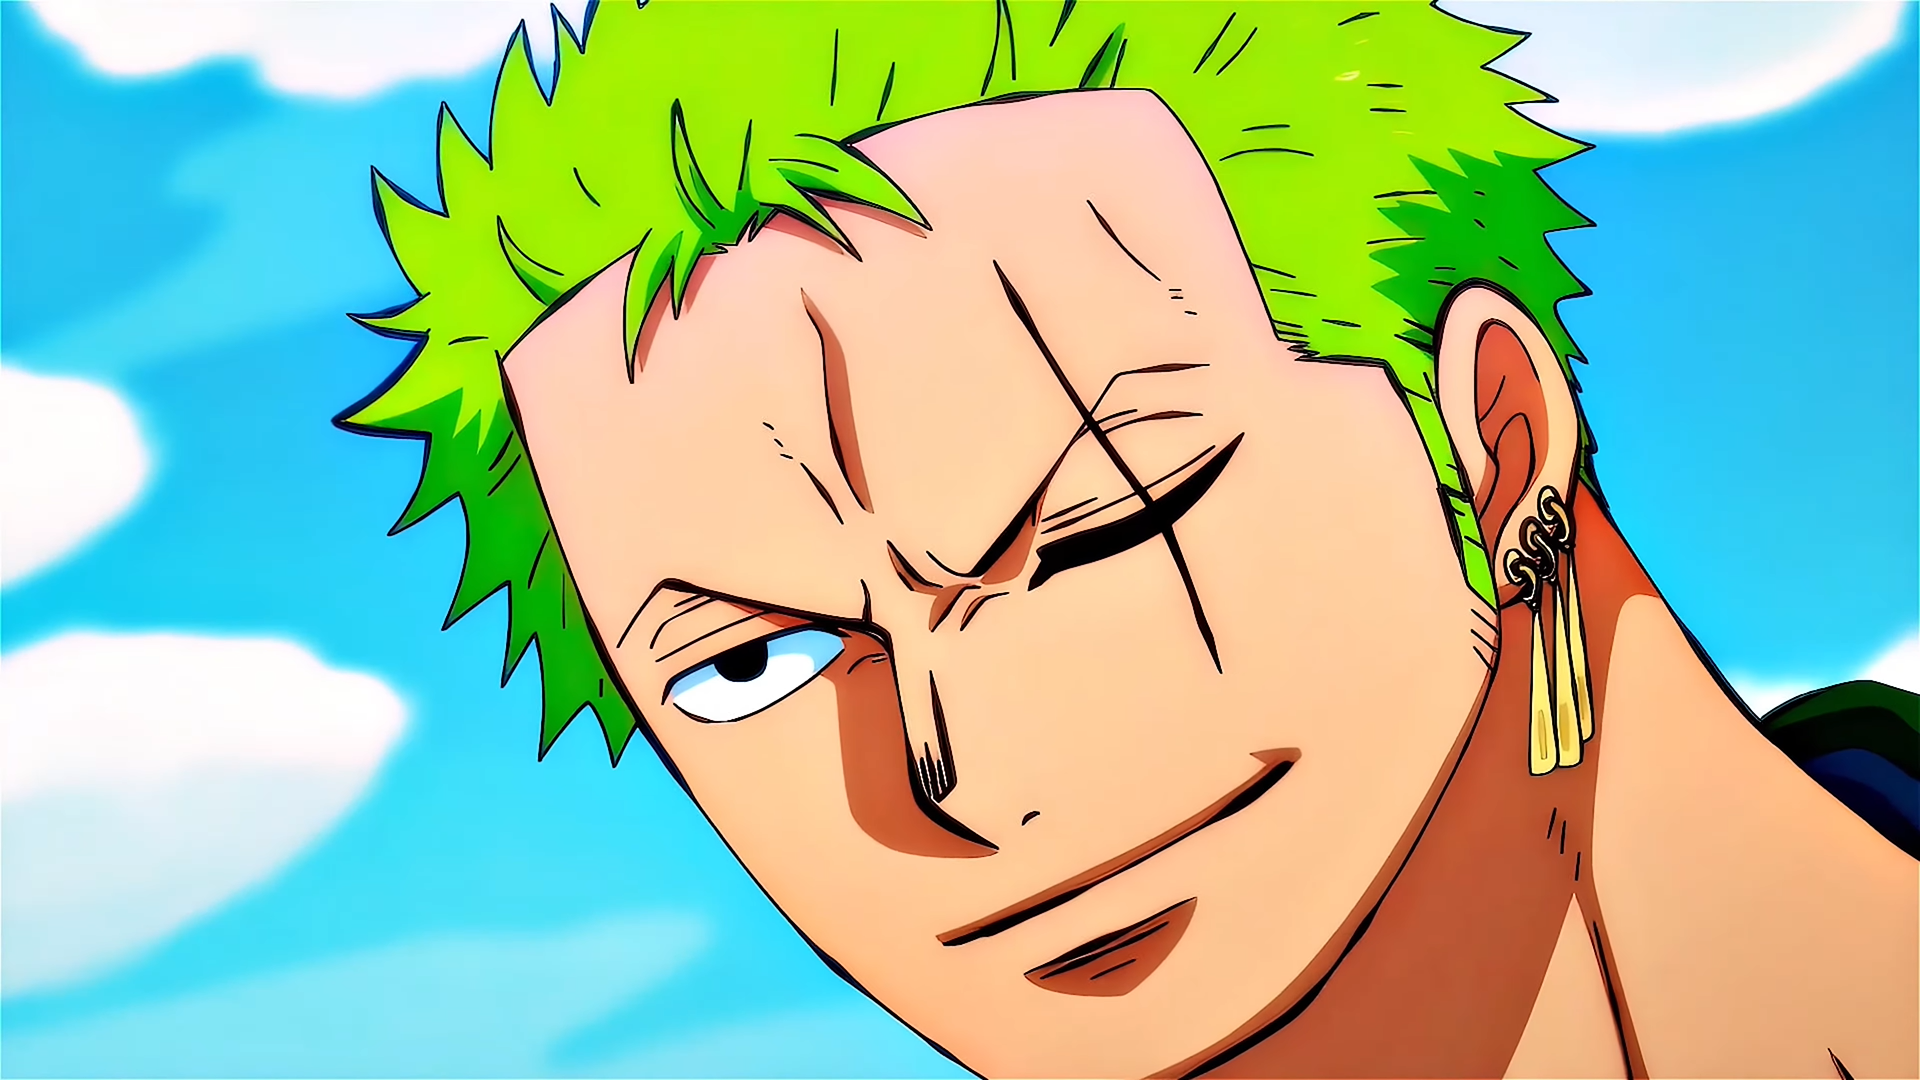 Assessing Zoro's Physical Abilities